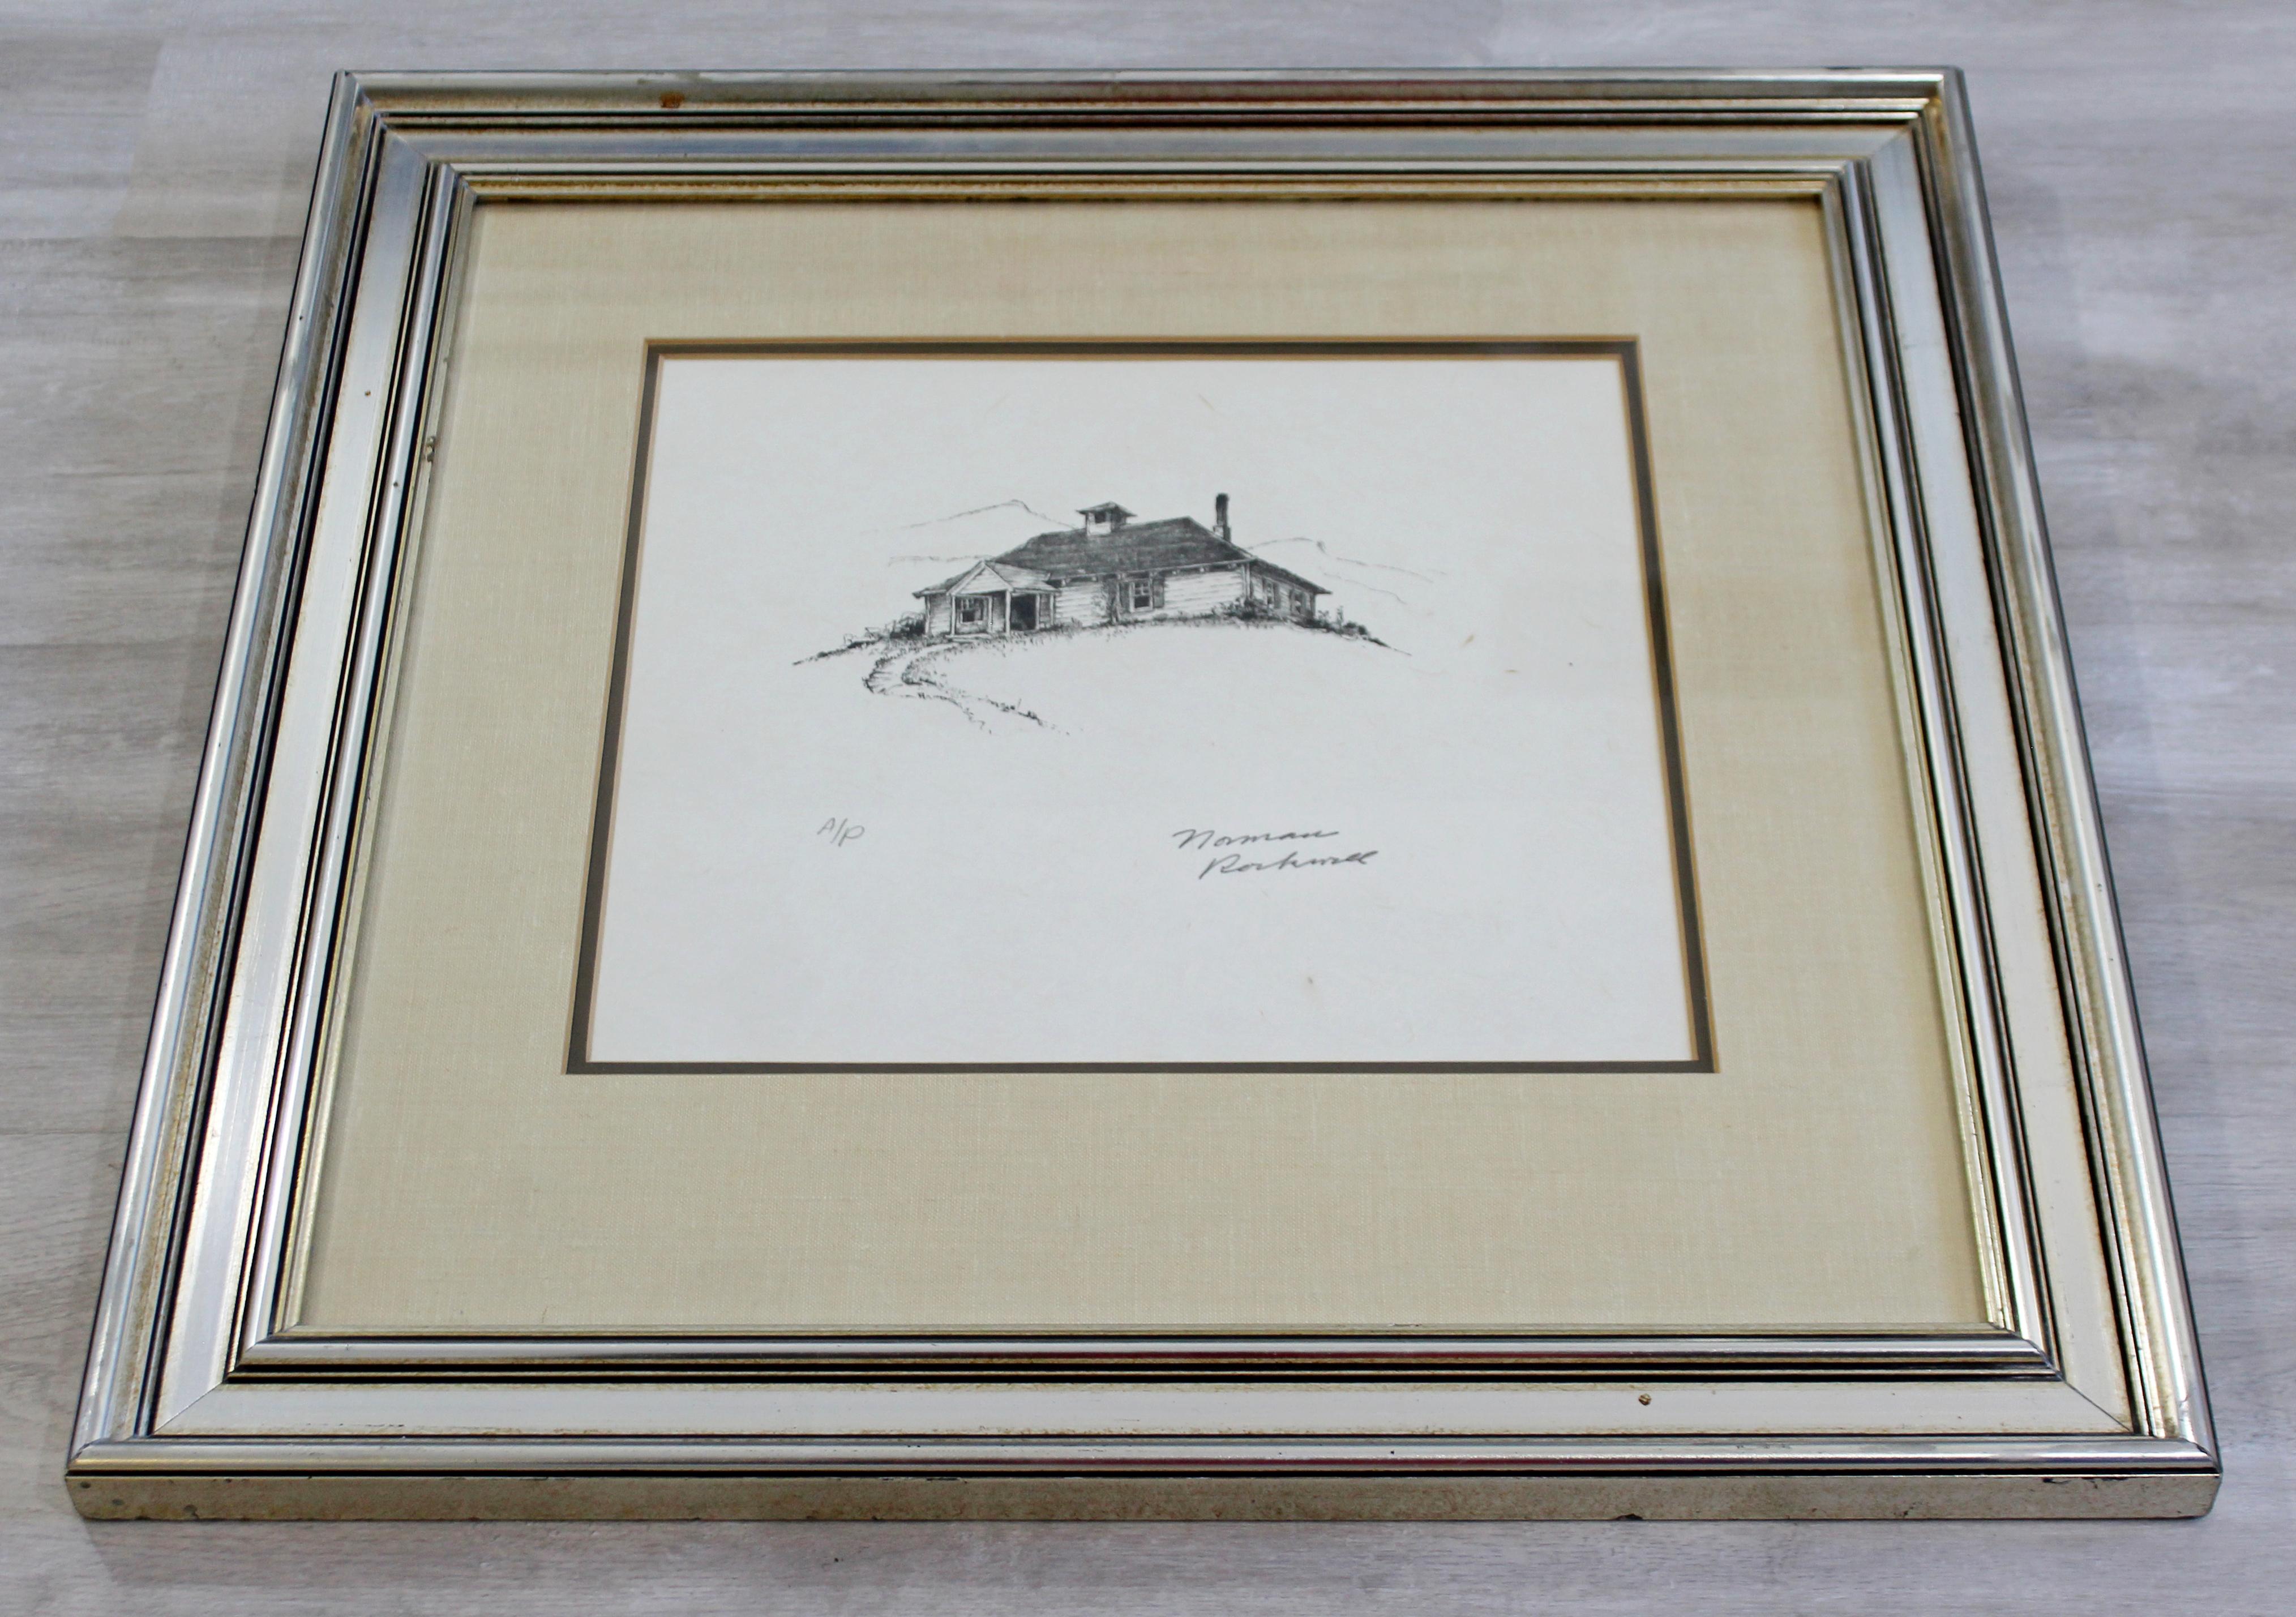 For your consideration is a framed, A.P. Lithograph of Norman Rockwell's 1947 modern illustration 